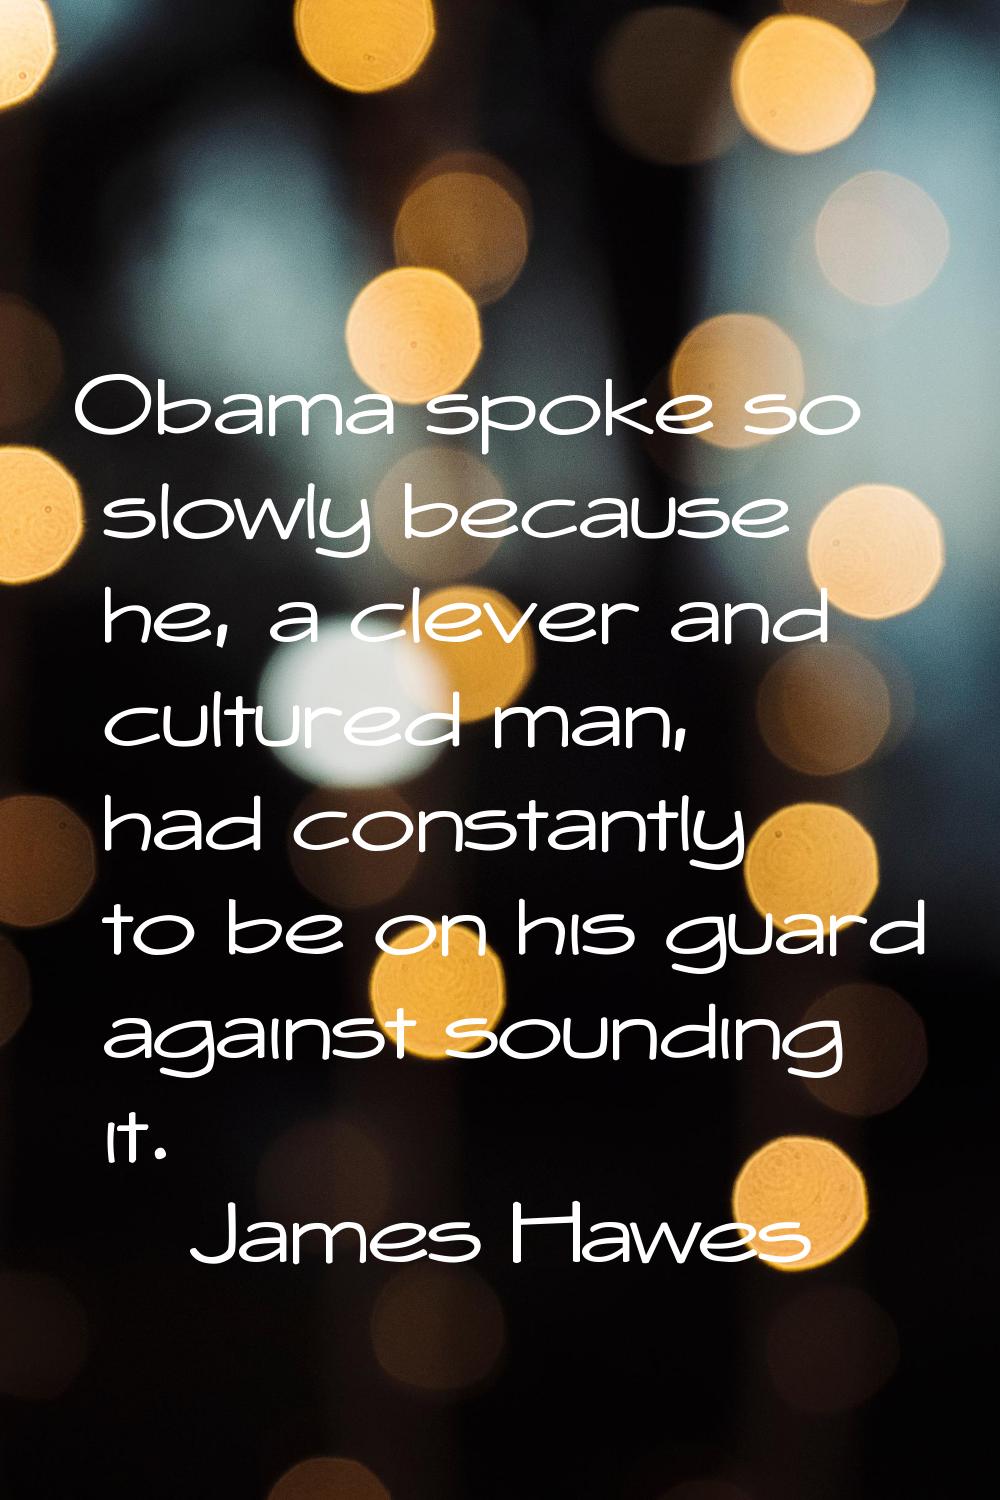 Obama spoke so slowly because he, a clever and cultured man, had constantly to be on his guard agai